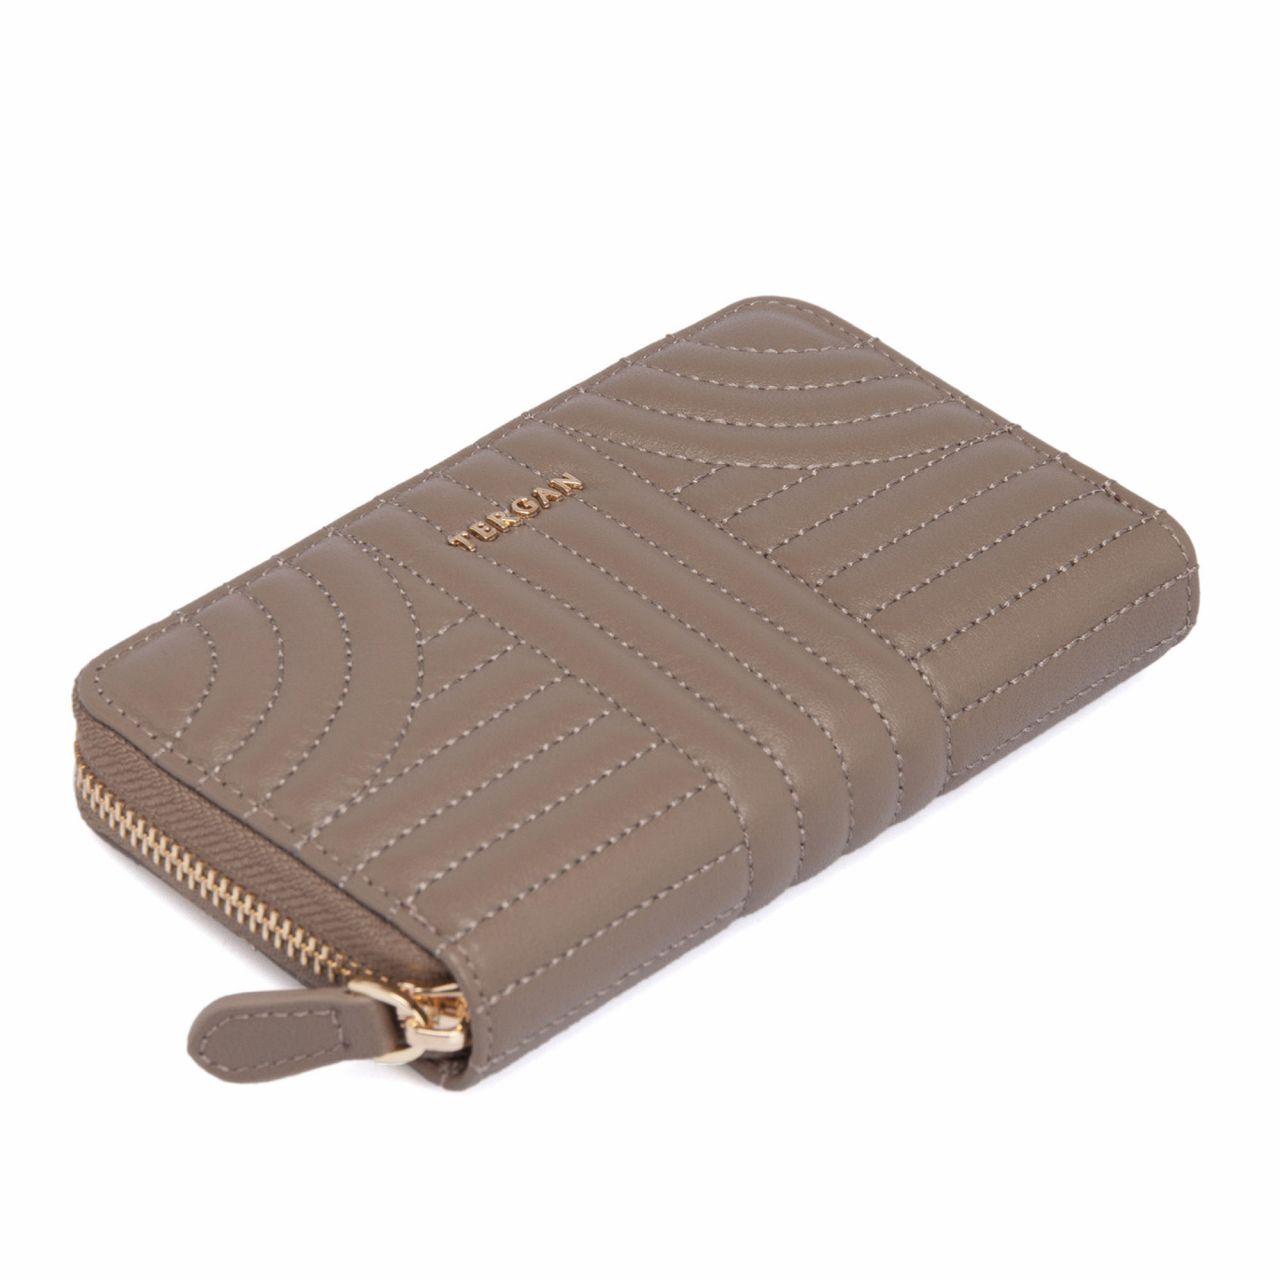 Women's wallet with internal coin holder